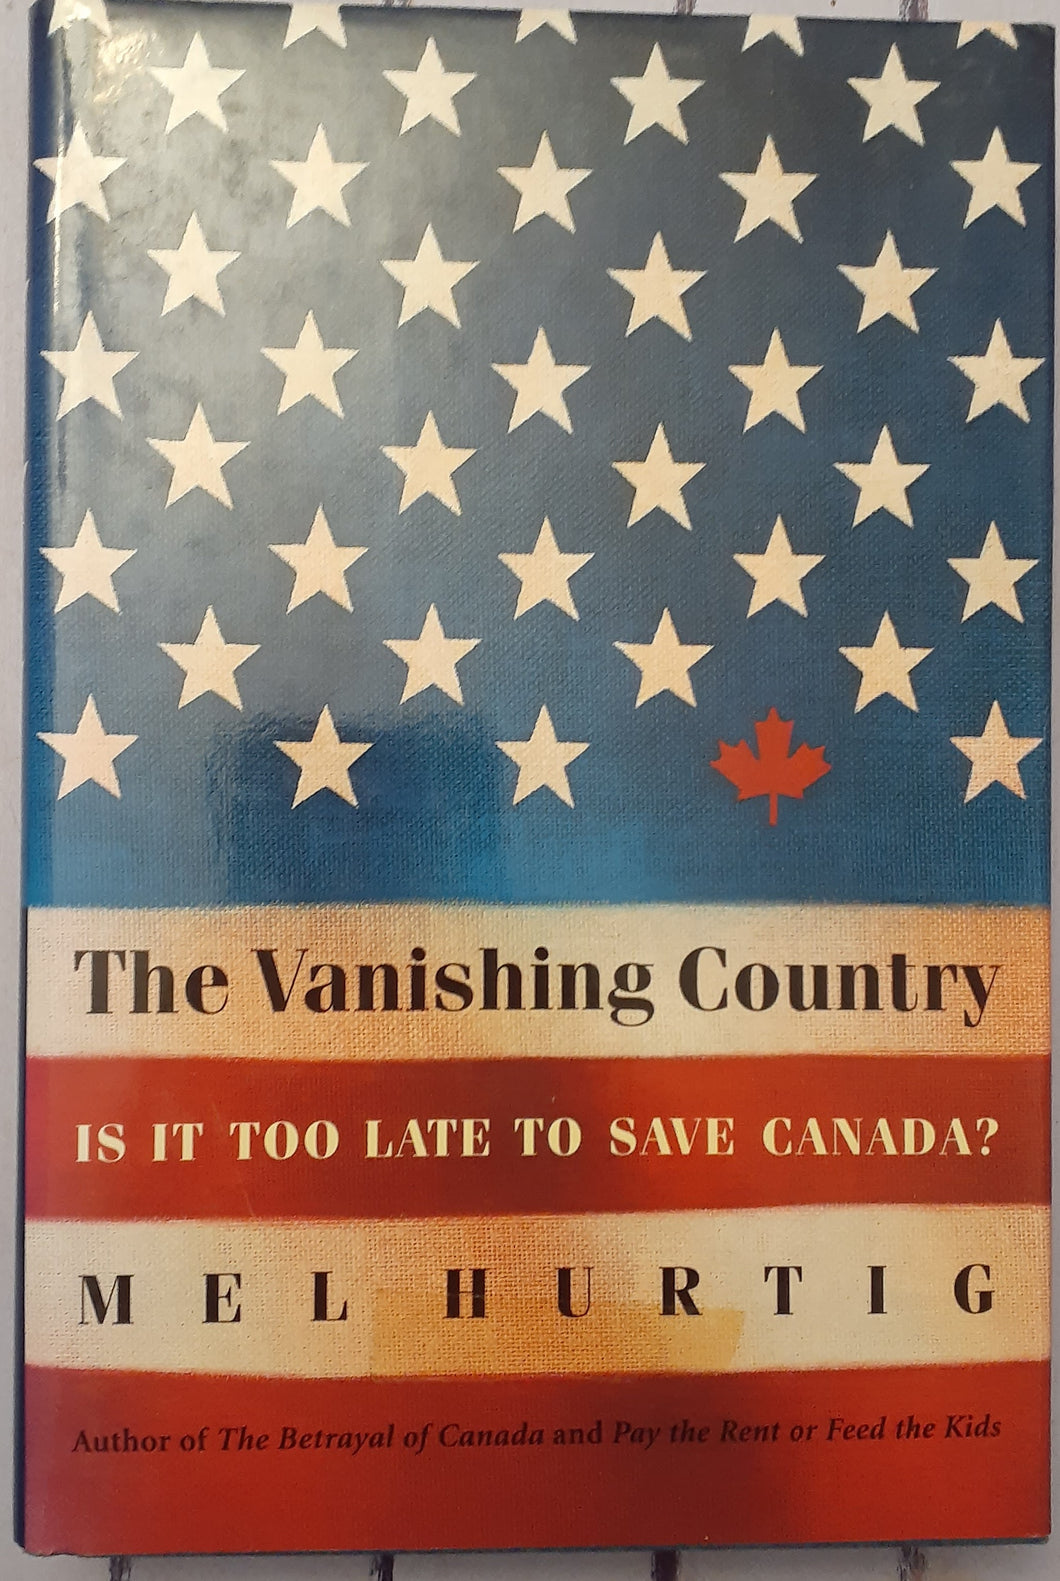 The Vanishing Country: Is it Too Late to Save Canada?